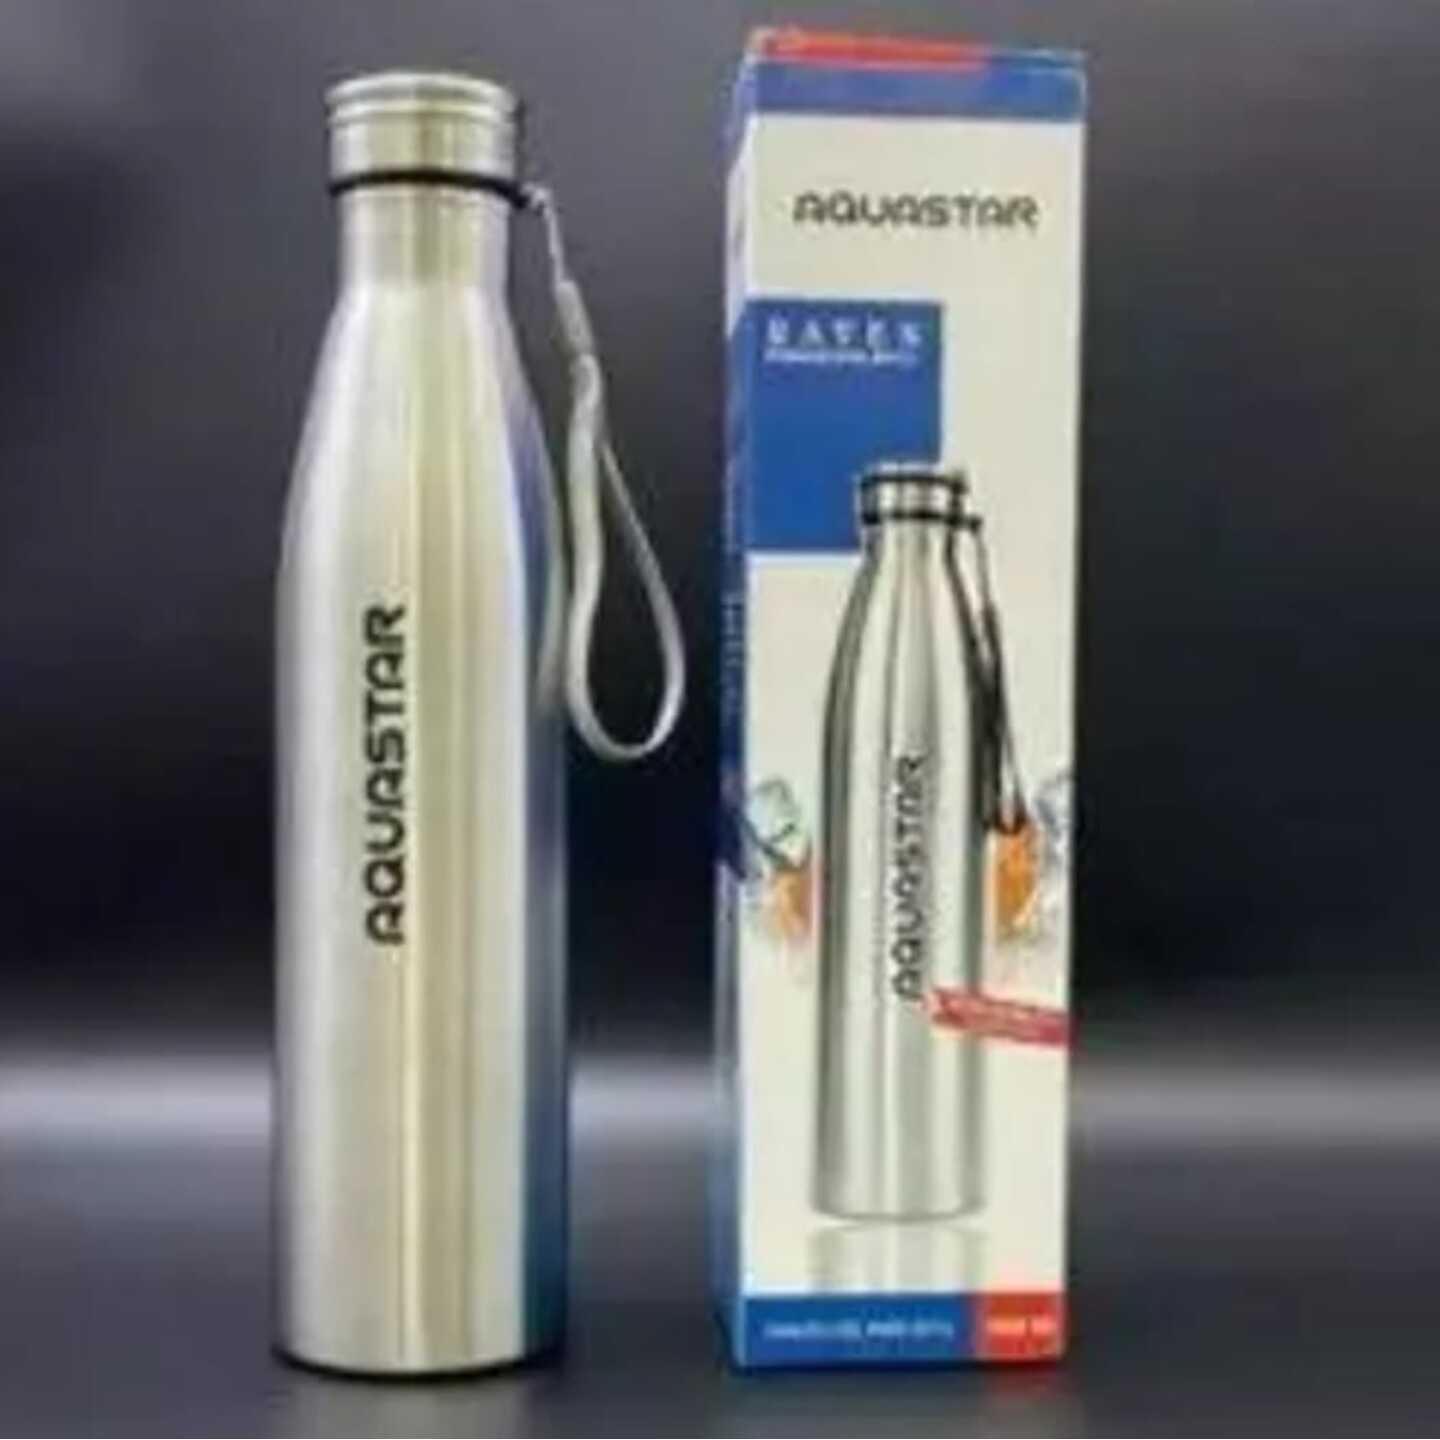 High Quality Stainless Steel Fridge Water Bottle Leak Proof For Office, Home, School, Gym, Kitchen, Travel etc. - 1Litre - Silver